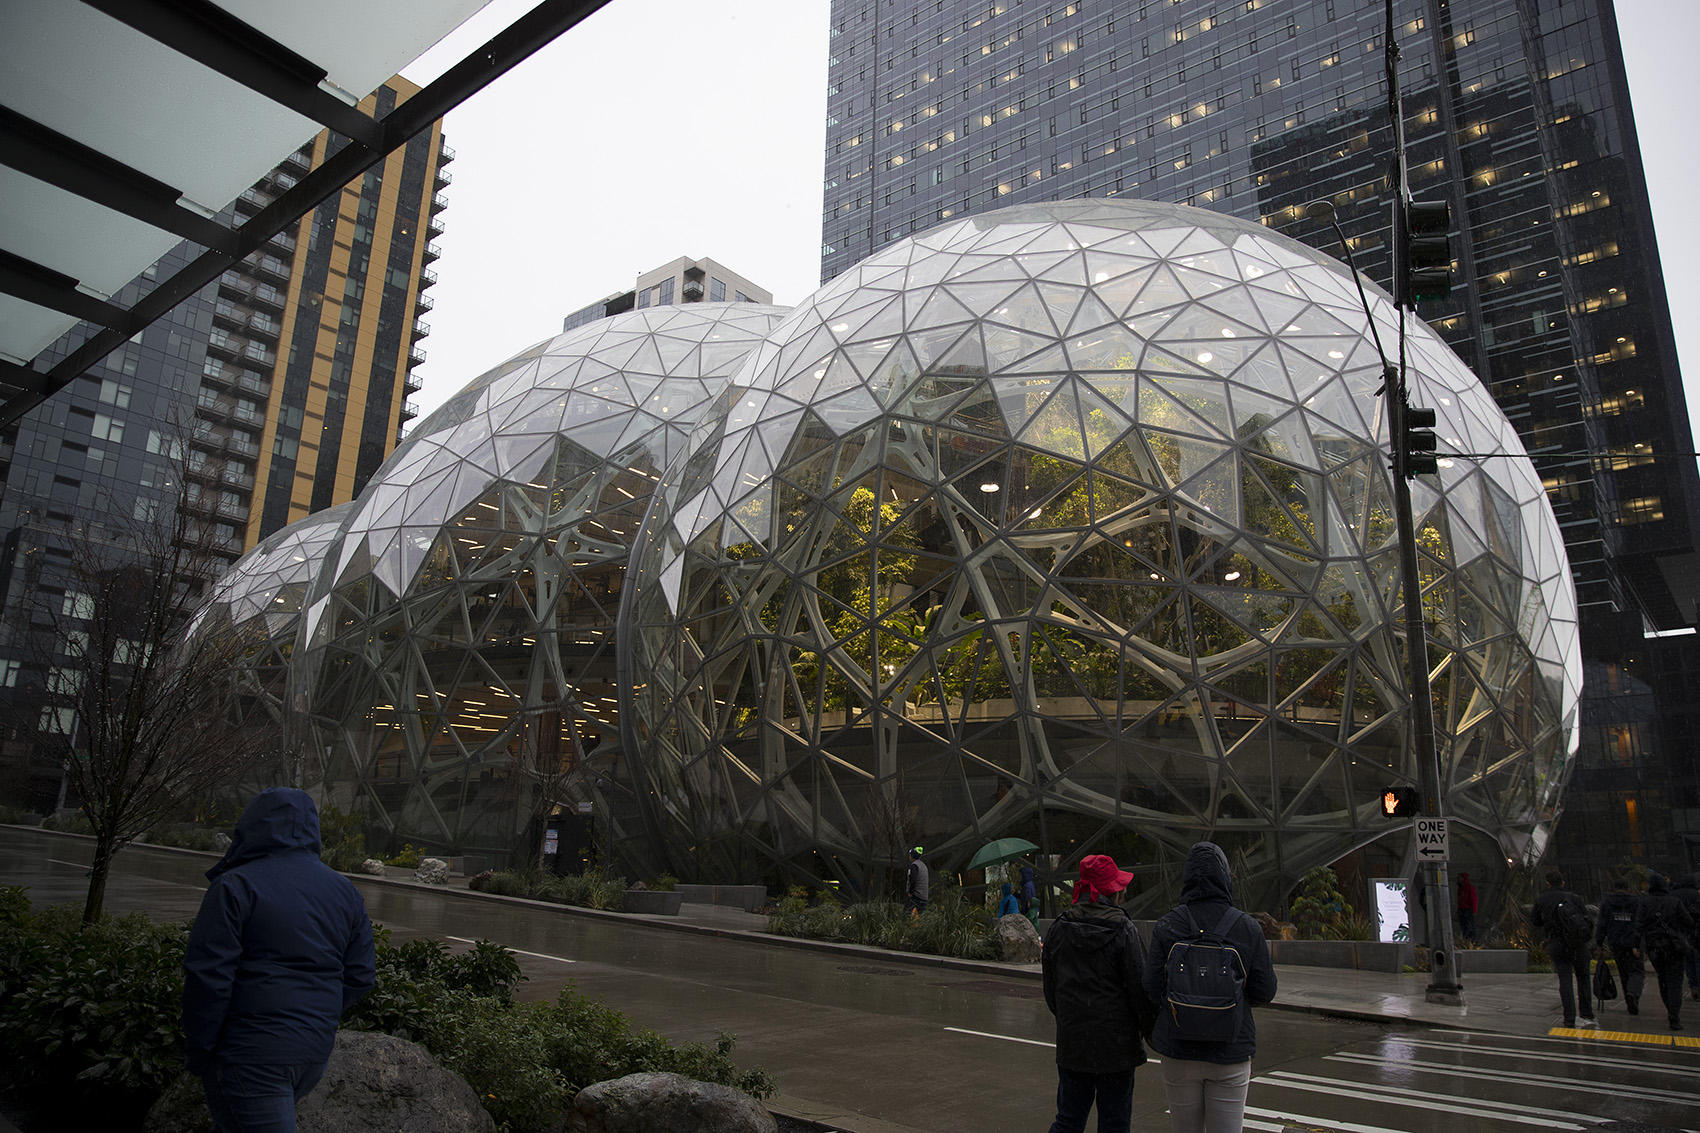 Amazon's spheres are shown on Monday, January 29, 2018, during the spheres grand opening in Seattle.